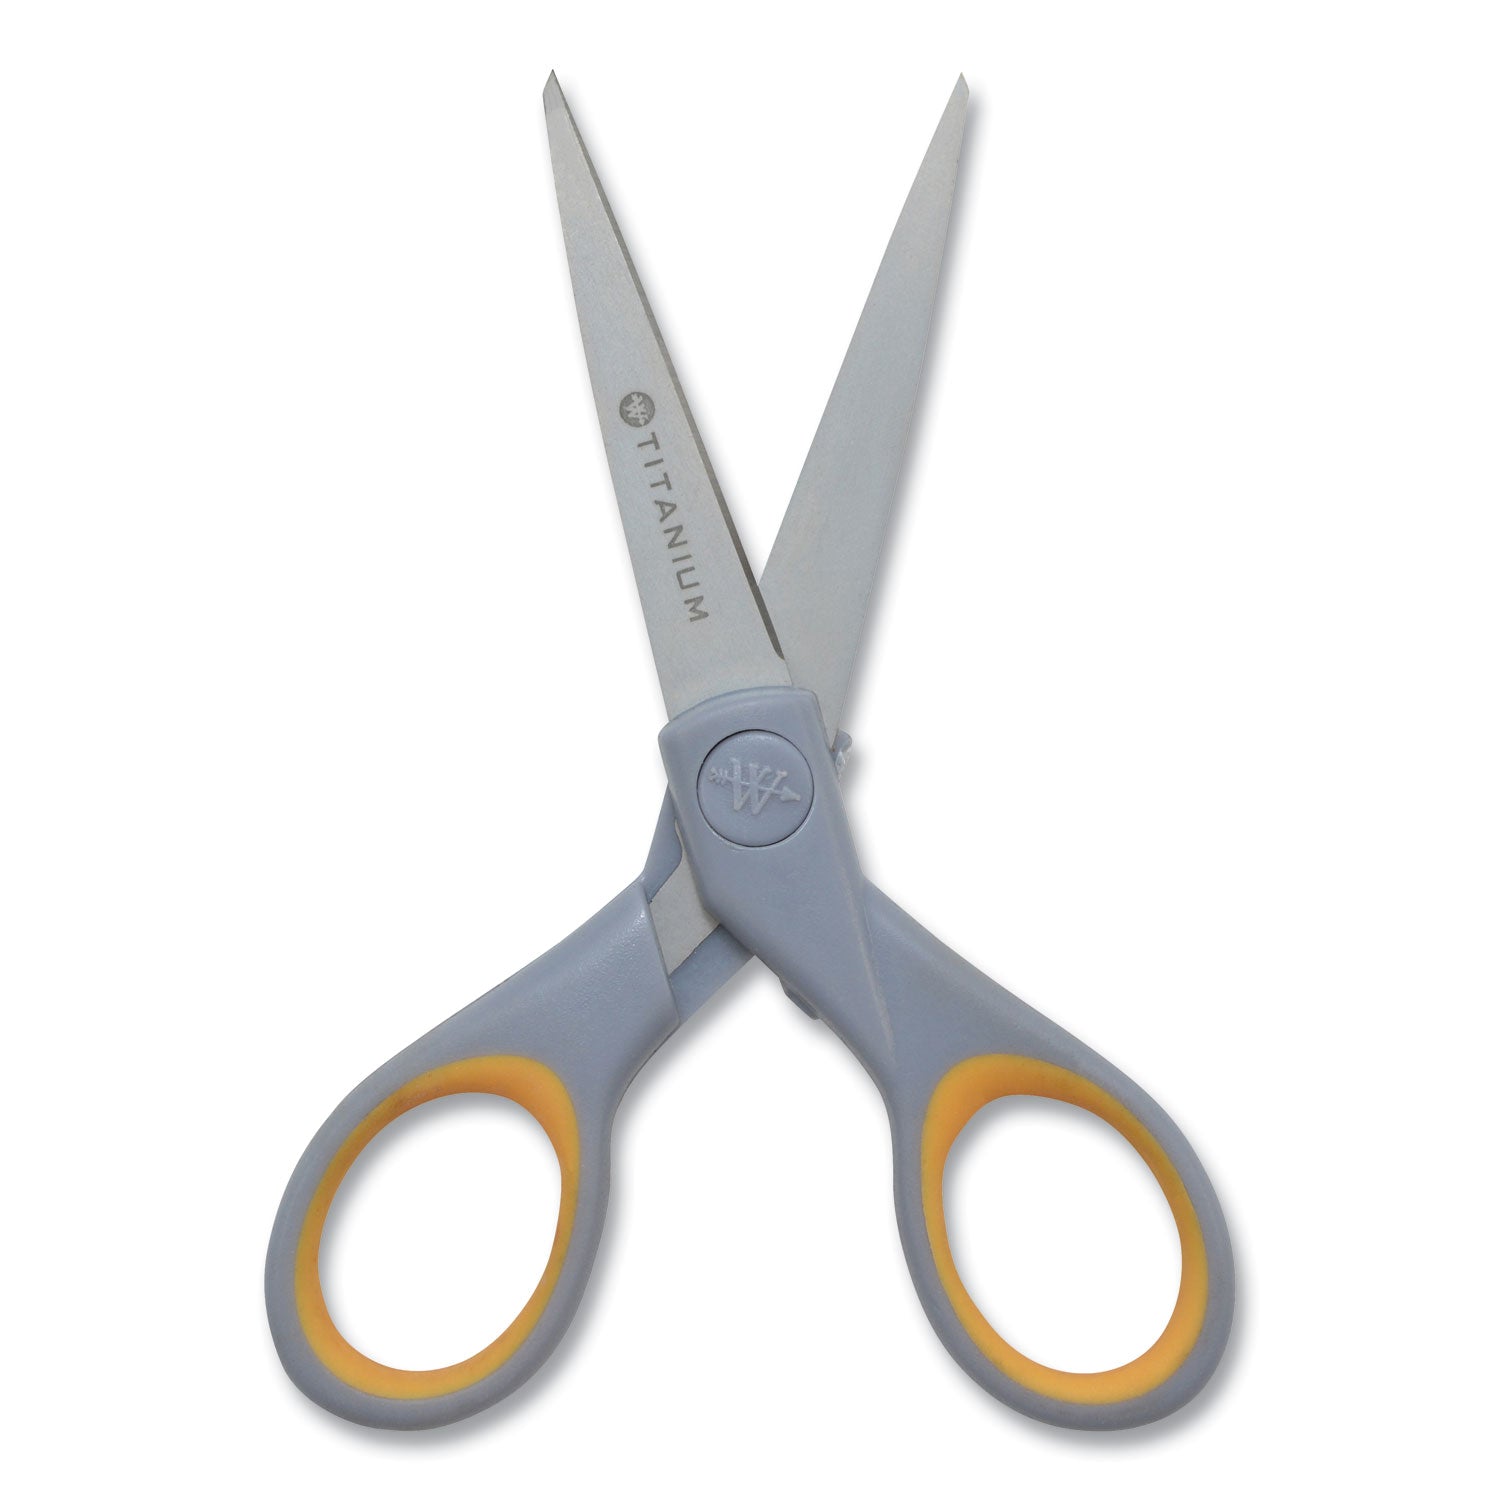 Titanium Bonded Scissors, 5" and 7" Long, 2.25" and 3.5" Cut Lengths, Gray/Yellow Straight Handles, 2/Pack - 